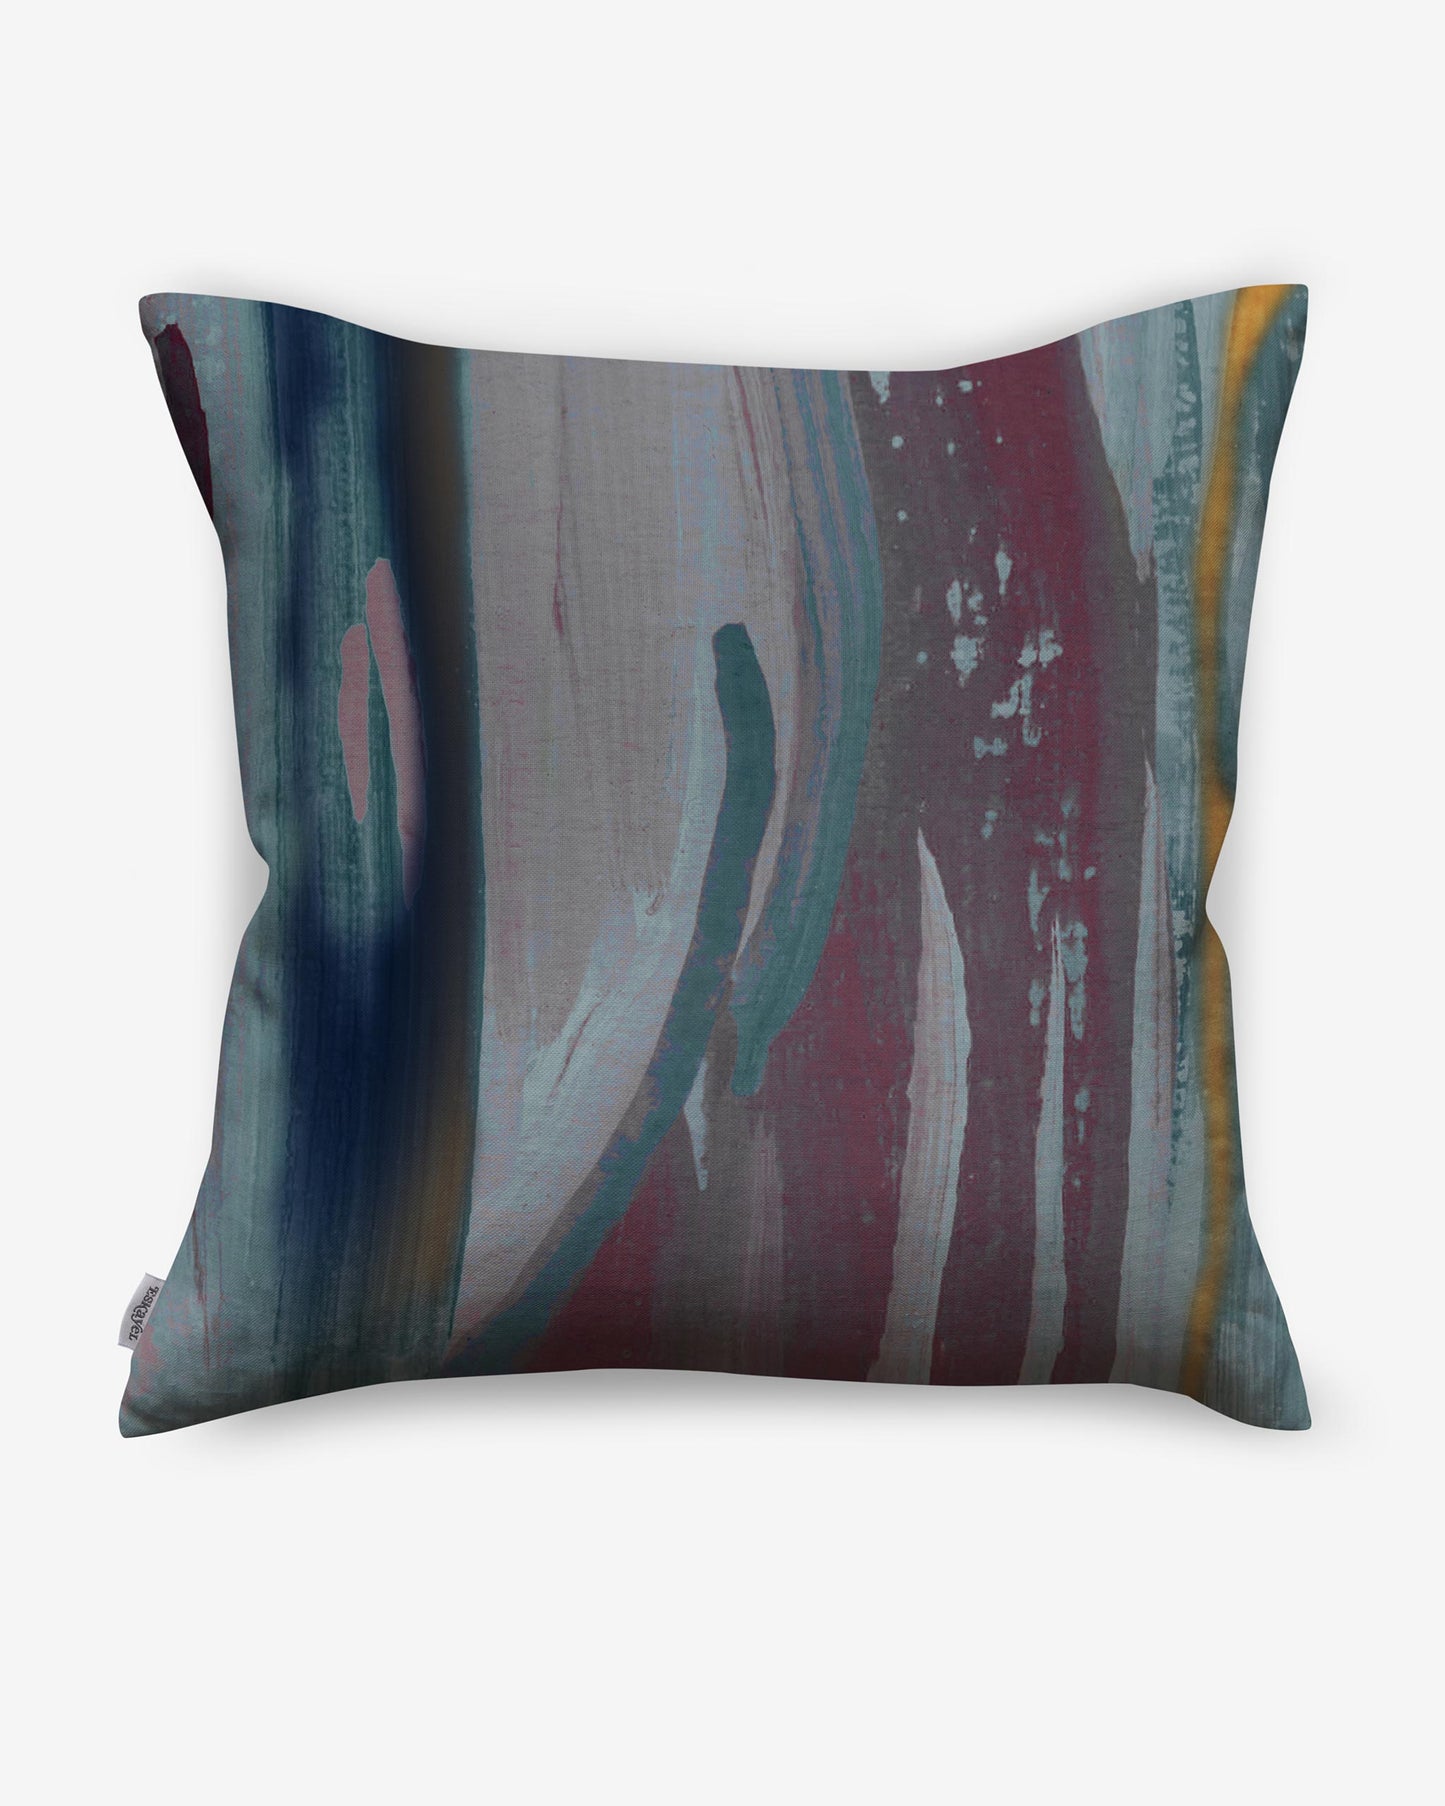 A Tesoro pillow with a Majorelle-inspired abstract painting on luxury fabric